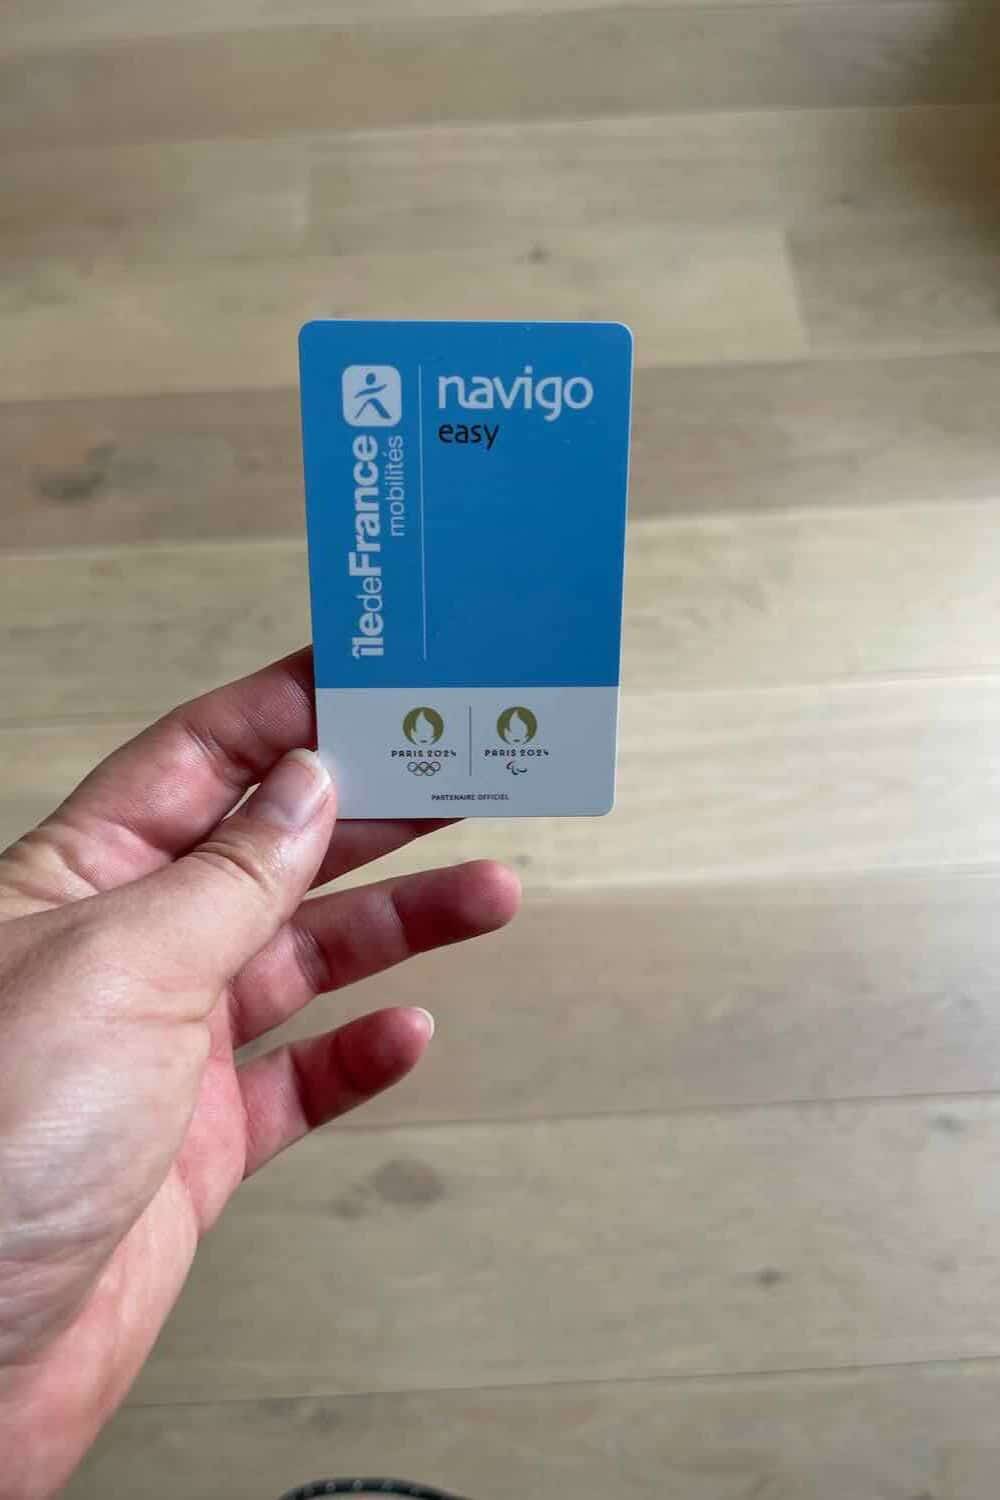 A close-up of a hand holding a Navigo Easy metro card, a convenient tool for solo travelers navigating public transport in Paris.